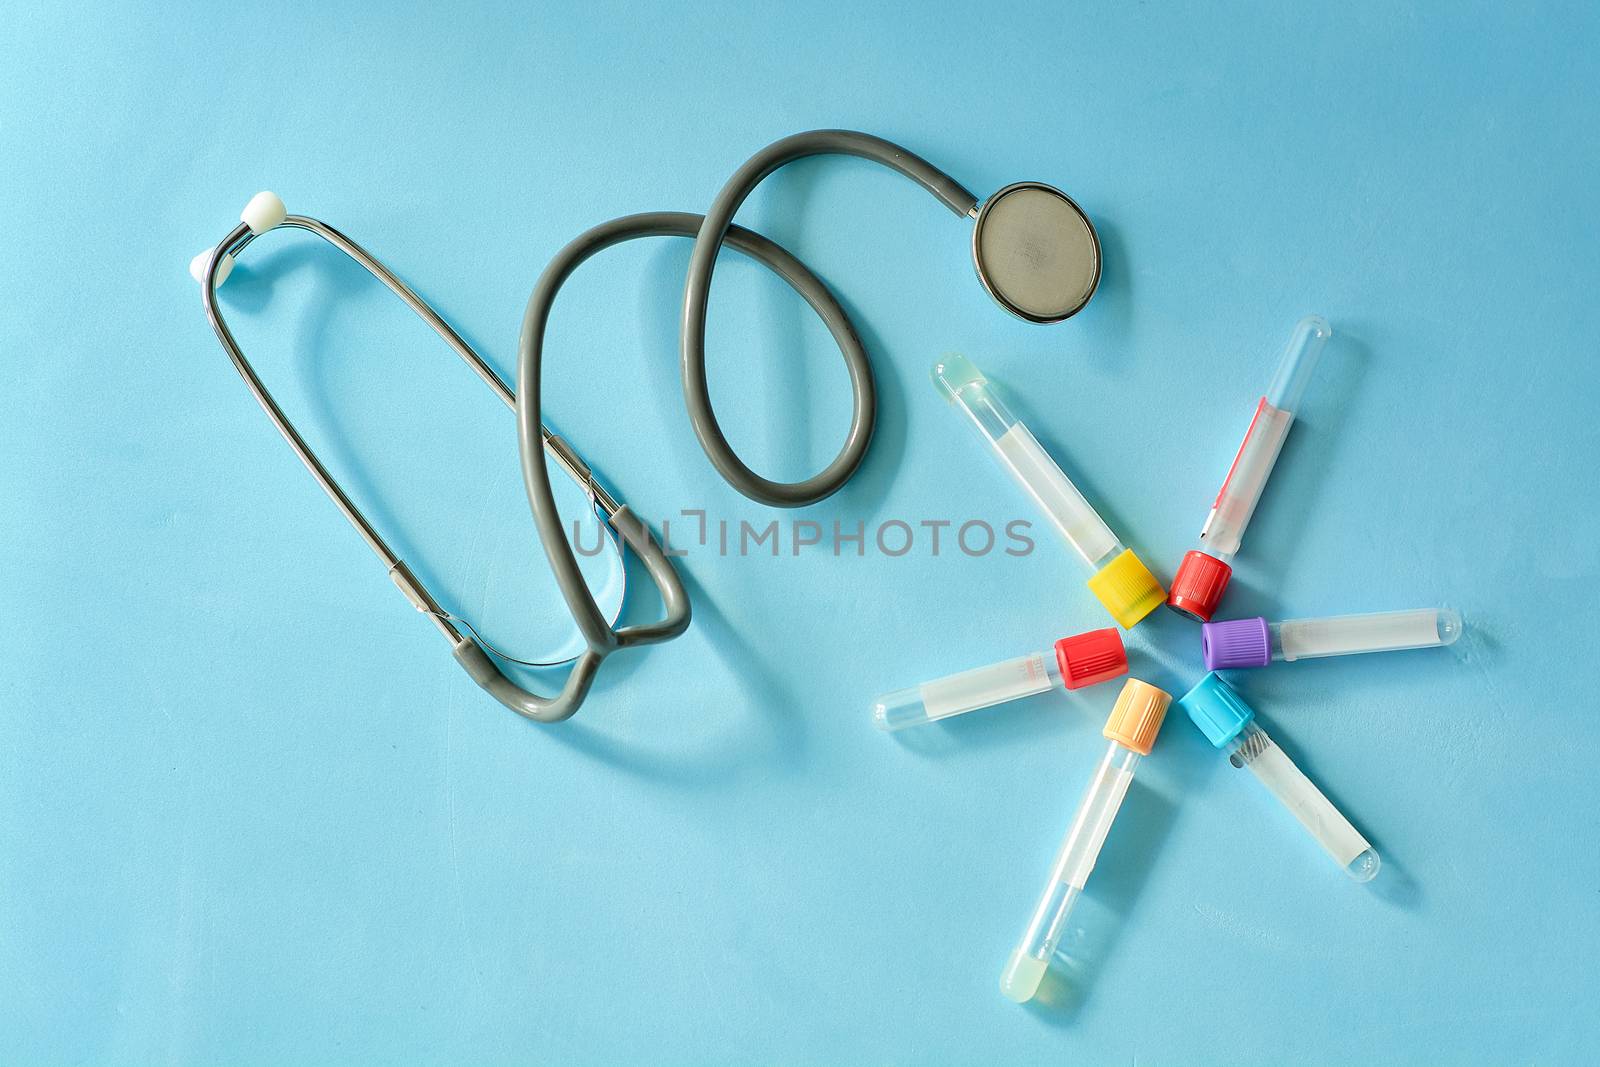 Phonendoscope stethoscope, different colored empty vacuum venipuncture test tubes on blue background with copy space for text. Medicine consept.